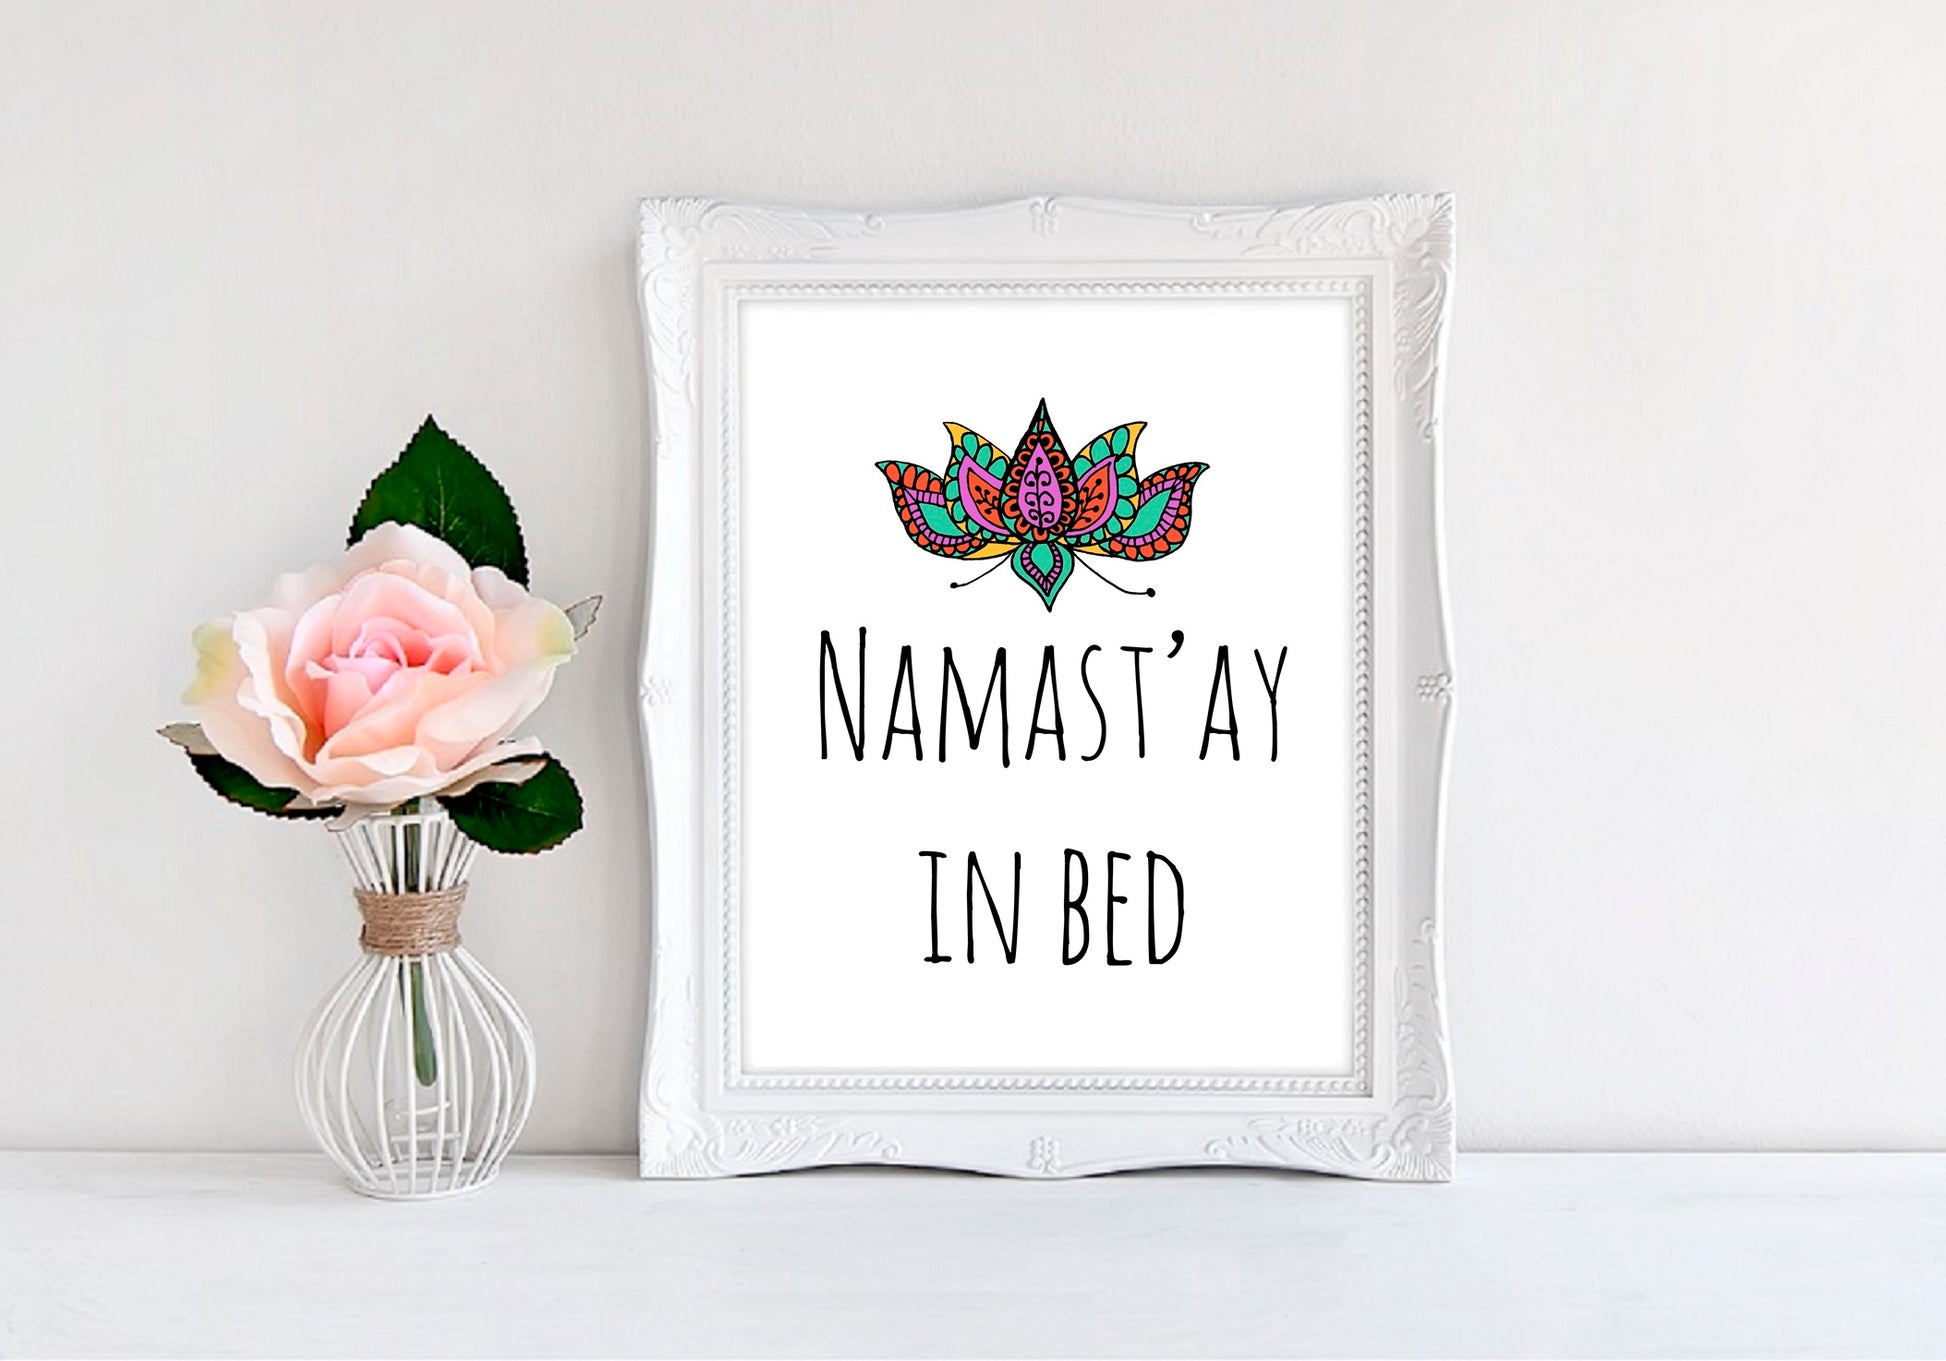 Namastay In Bed - 8"x10" Wall Print - MoonlightMakers